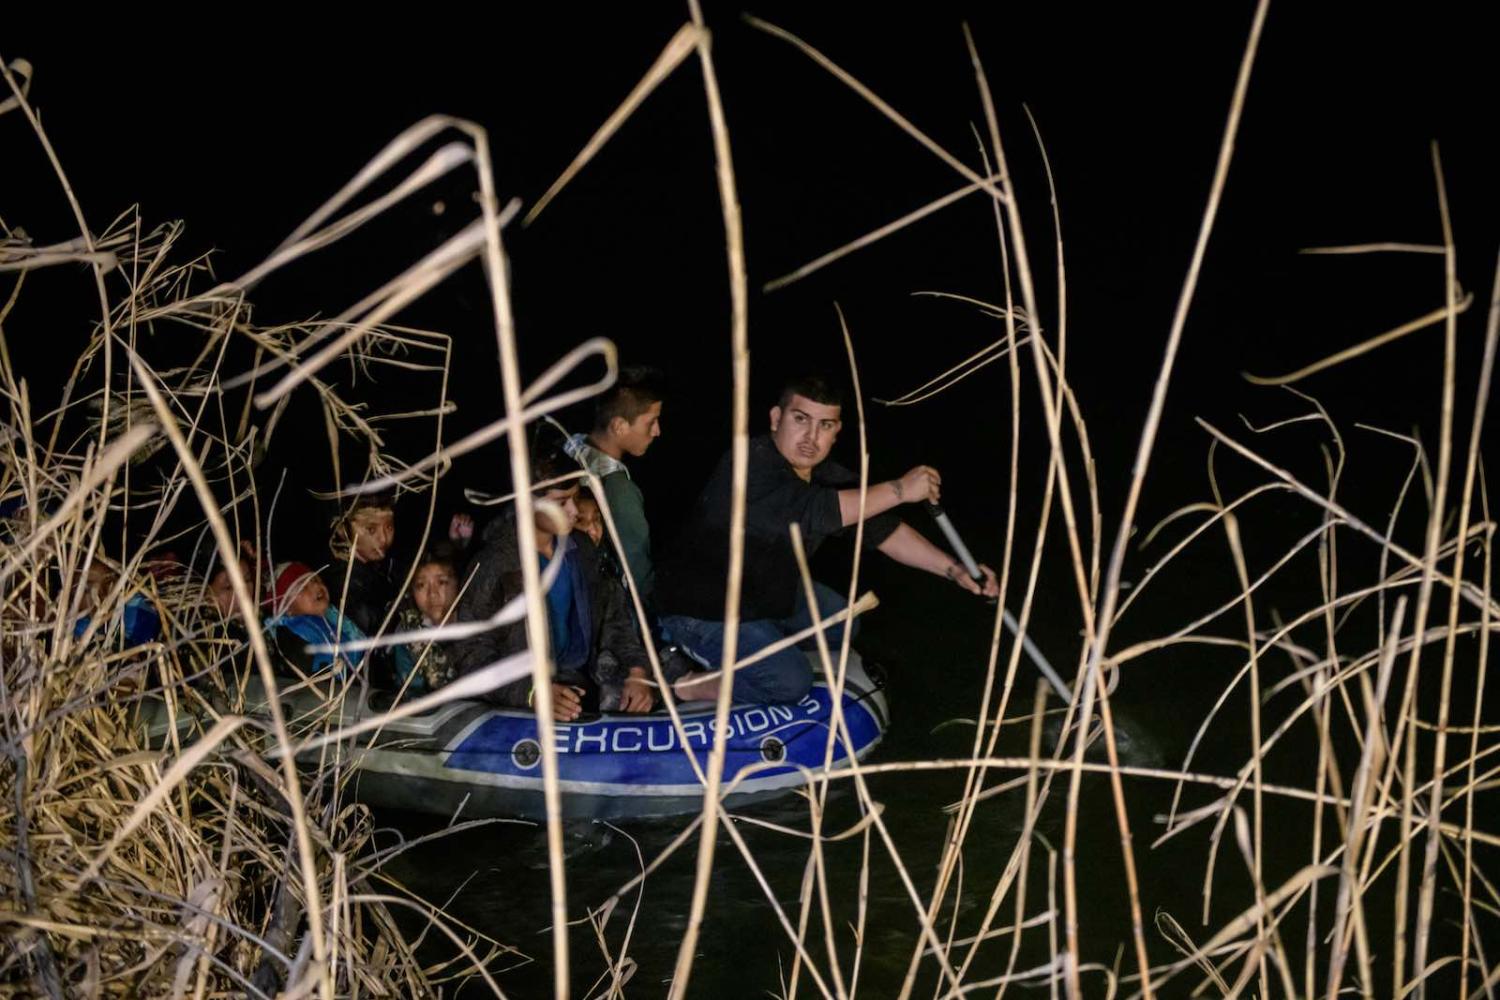 Honduran and Guatemalan asylum seekers arrive from Mexico in an inflatable boat as a “coyote” people smuggler steers towards the US side of the Rio Grande river in Roma, Texas, 28 March 2021 (Ed Jones/AFP via Getty Images)